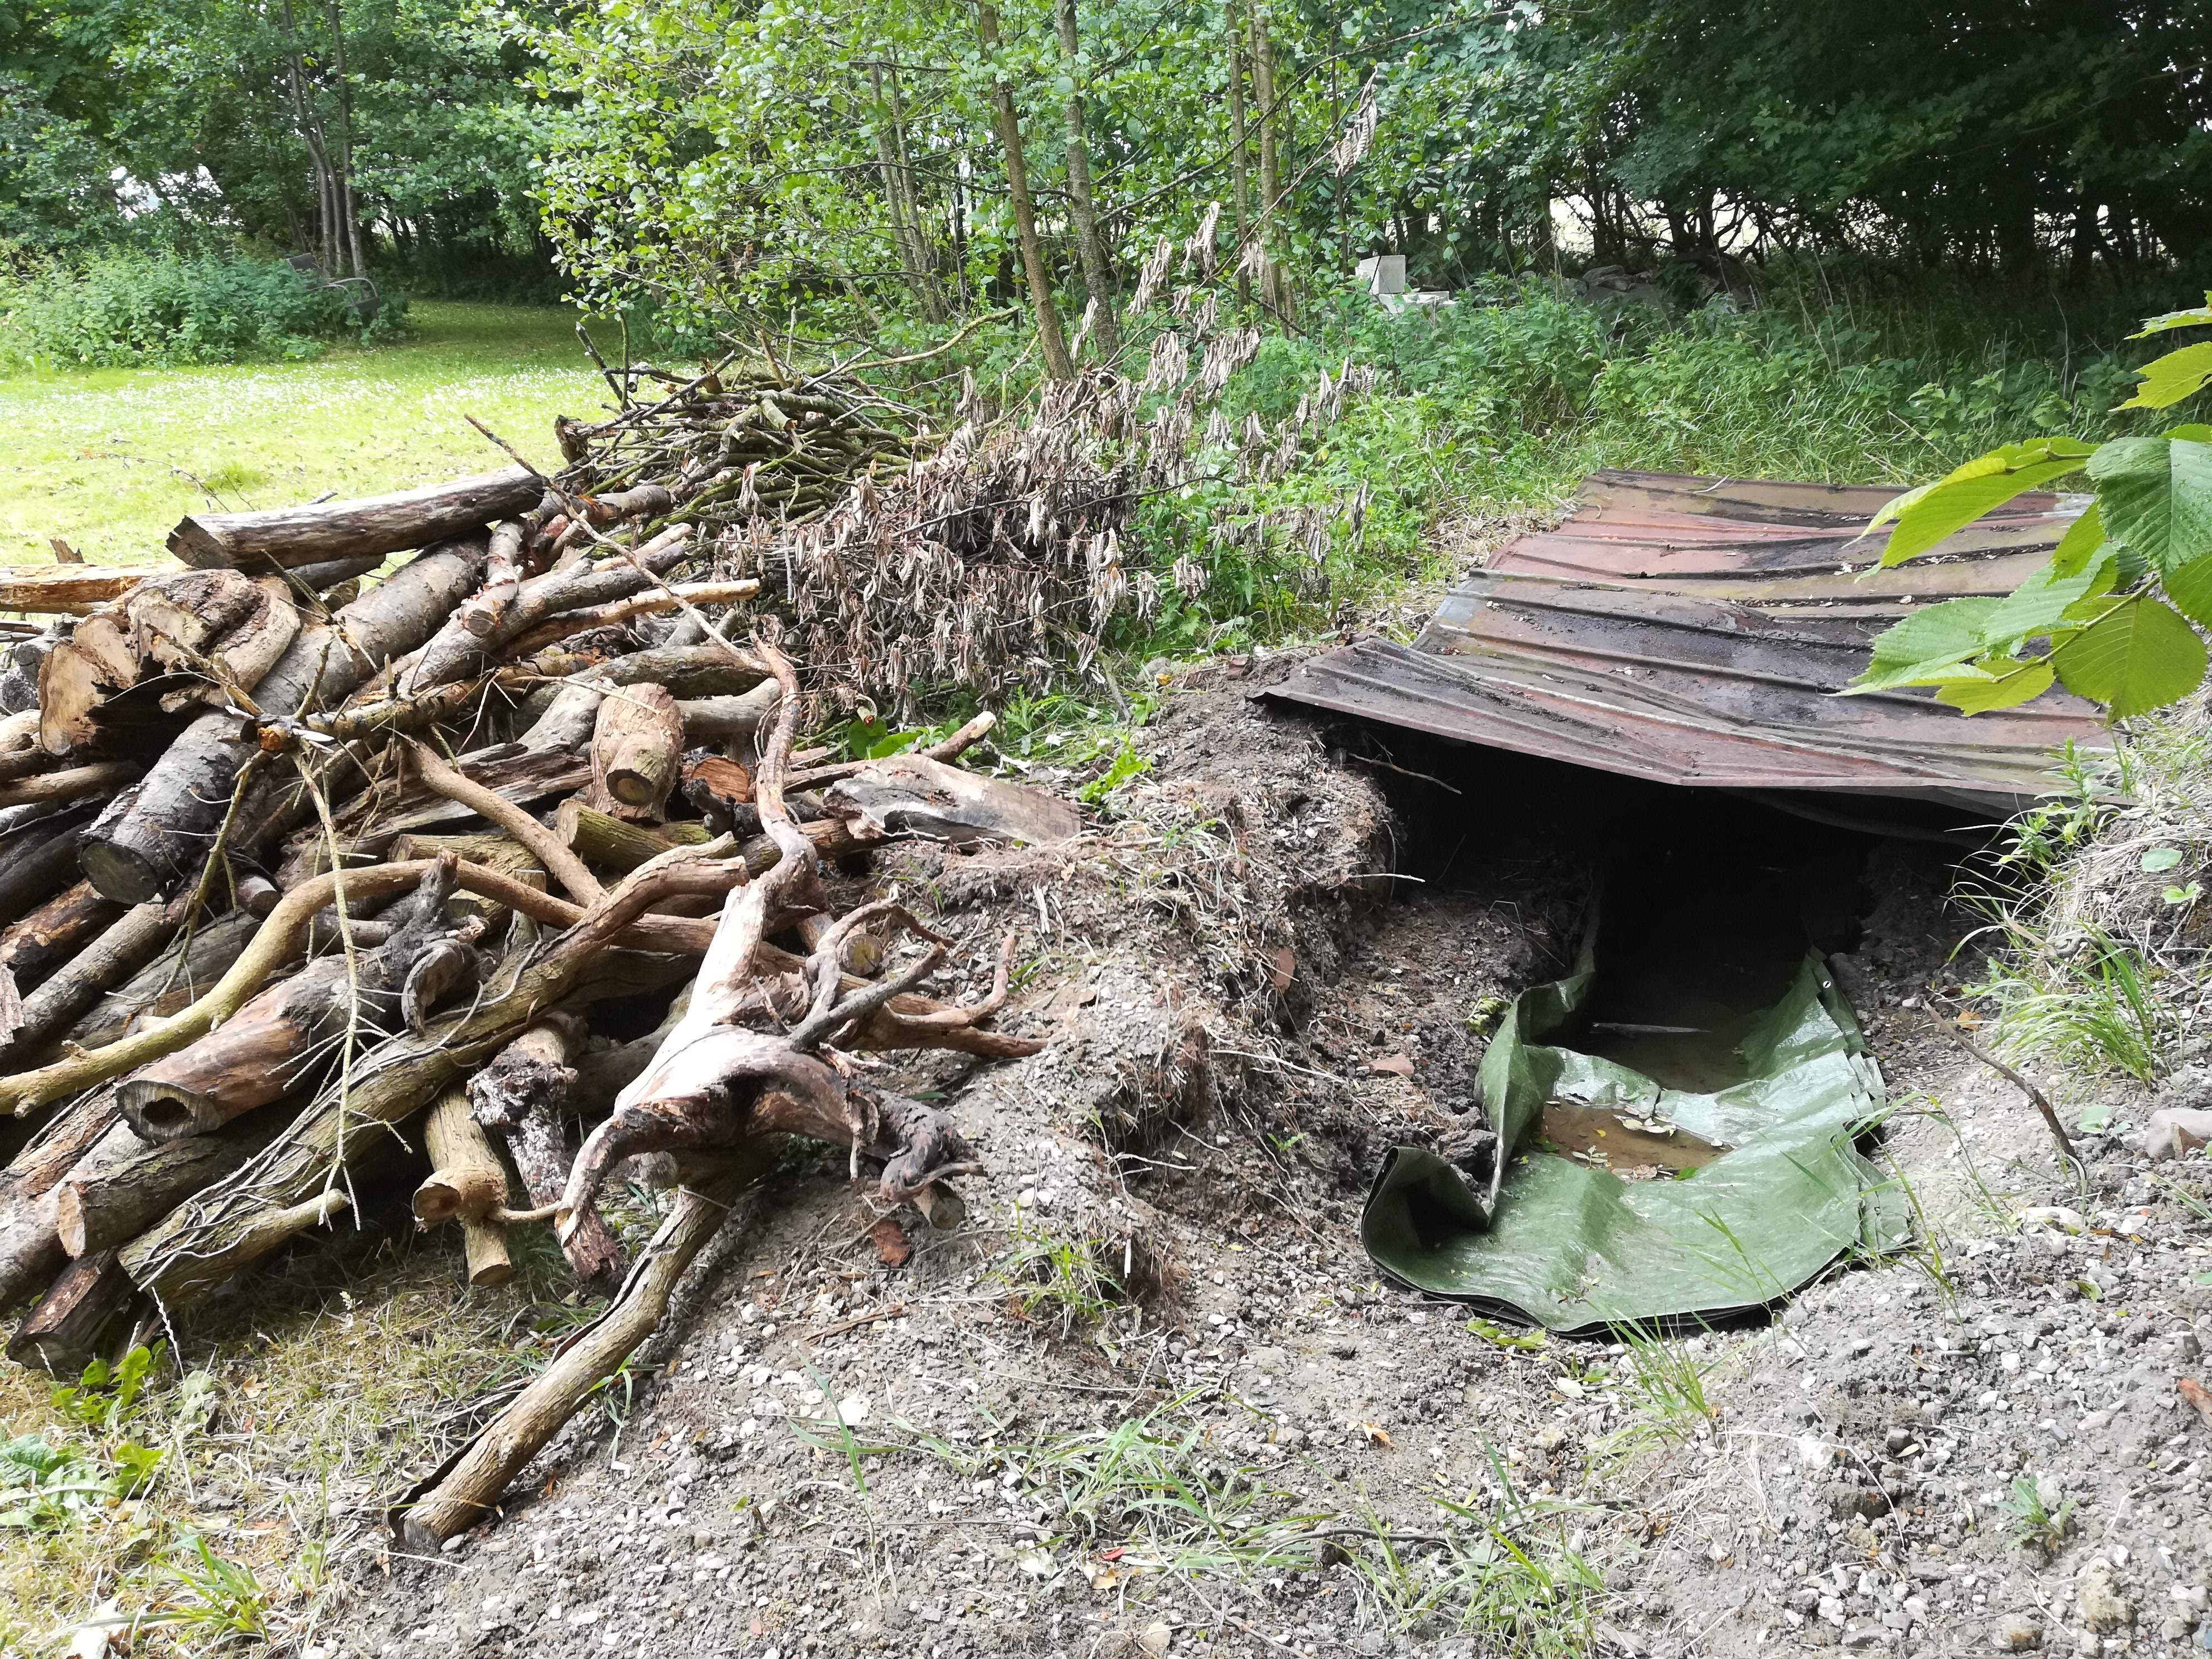 The Kiln is covered from the rain - and the firewood is ready.